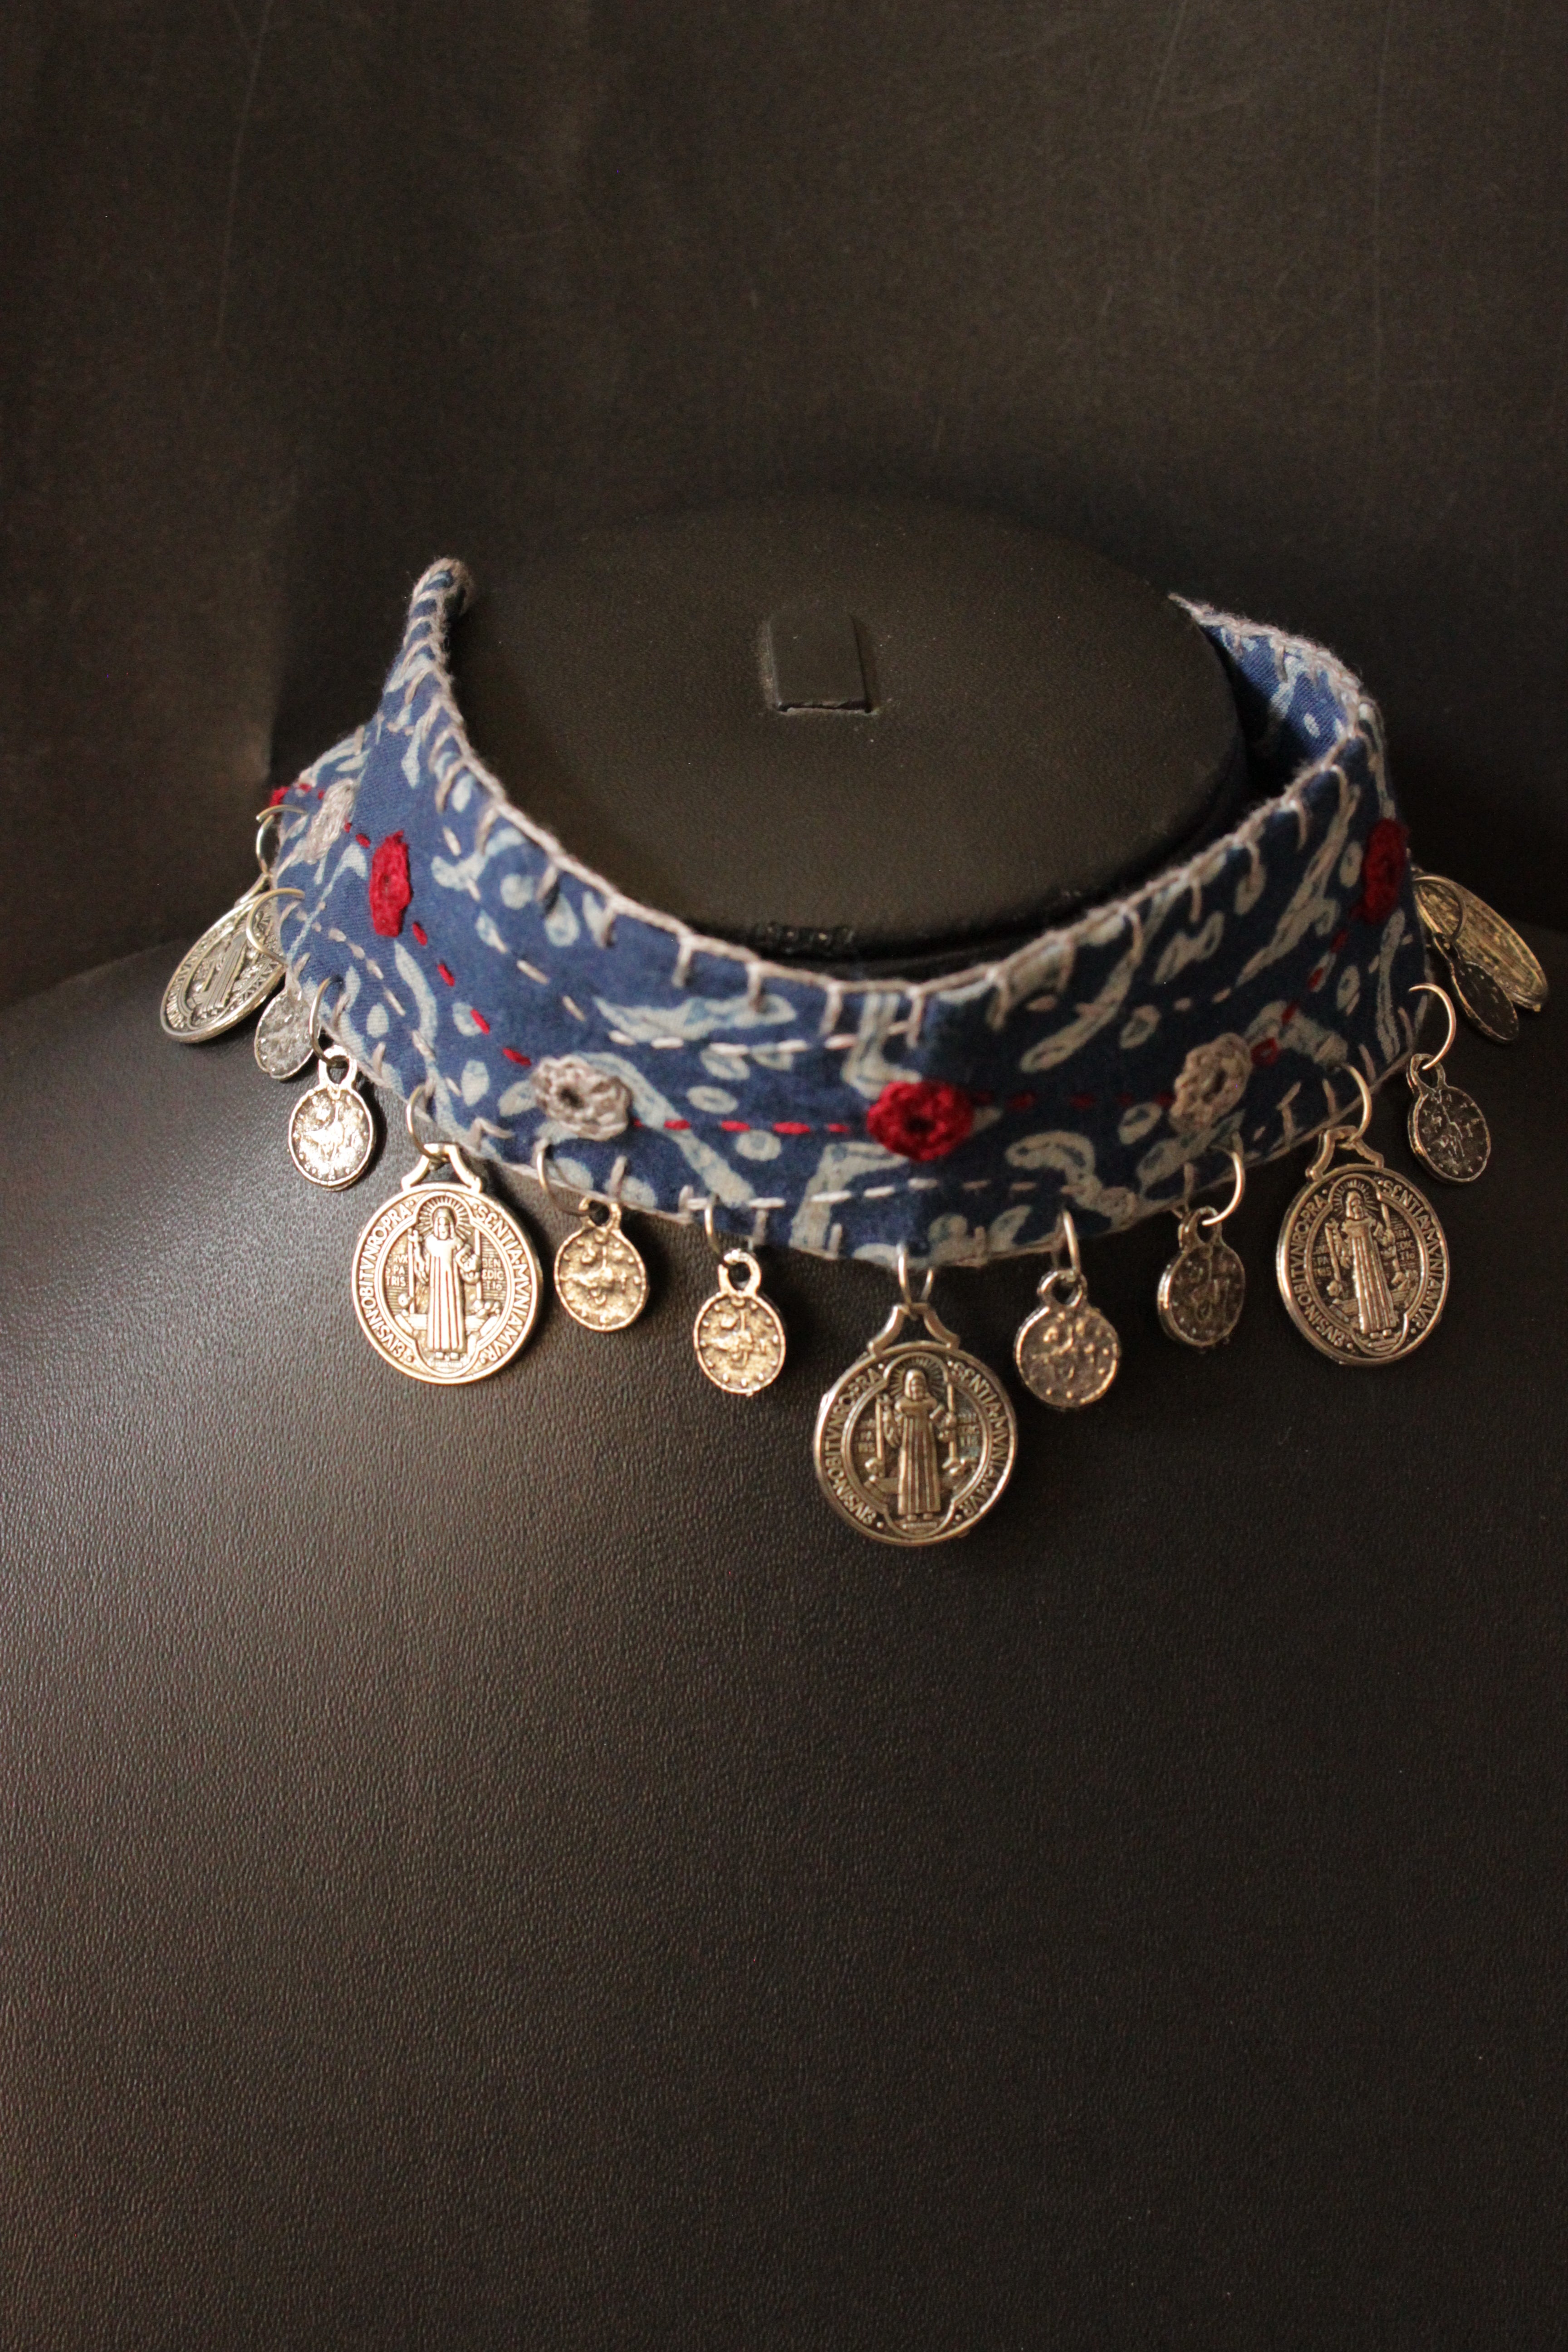 Bagru Printed Natural Dyed Indigo Fabric Choker Necklace Embellished with Stamped Metal Charms